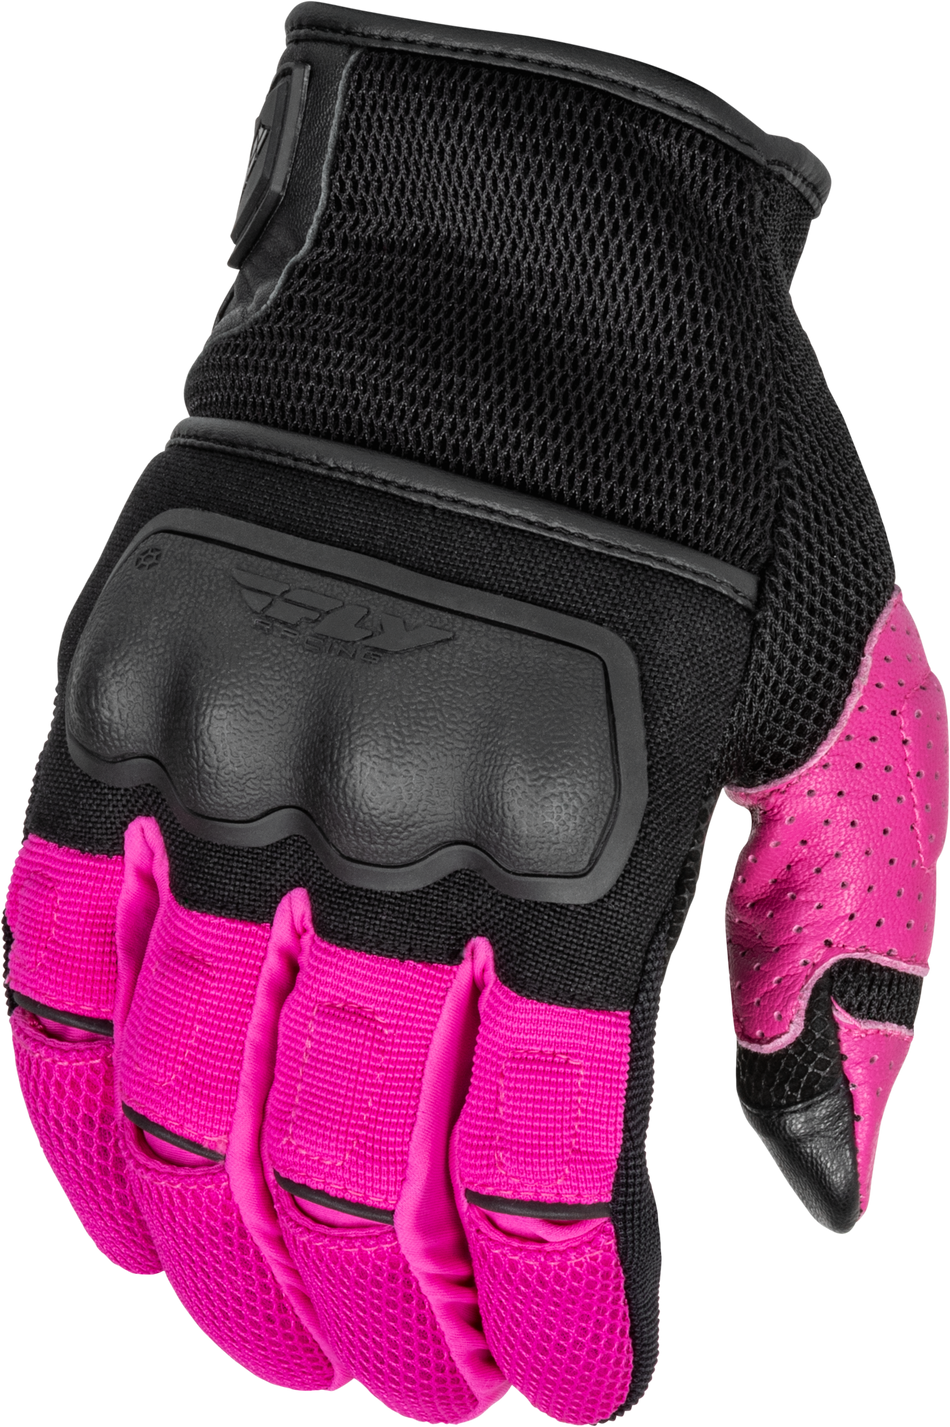 FLY RACING Women's Coolpro Force Gloves Black/Pink Sm 476-6302S